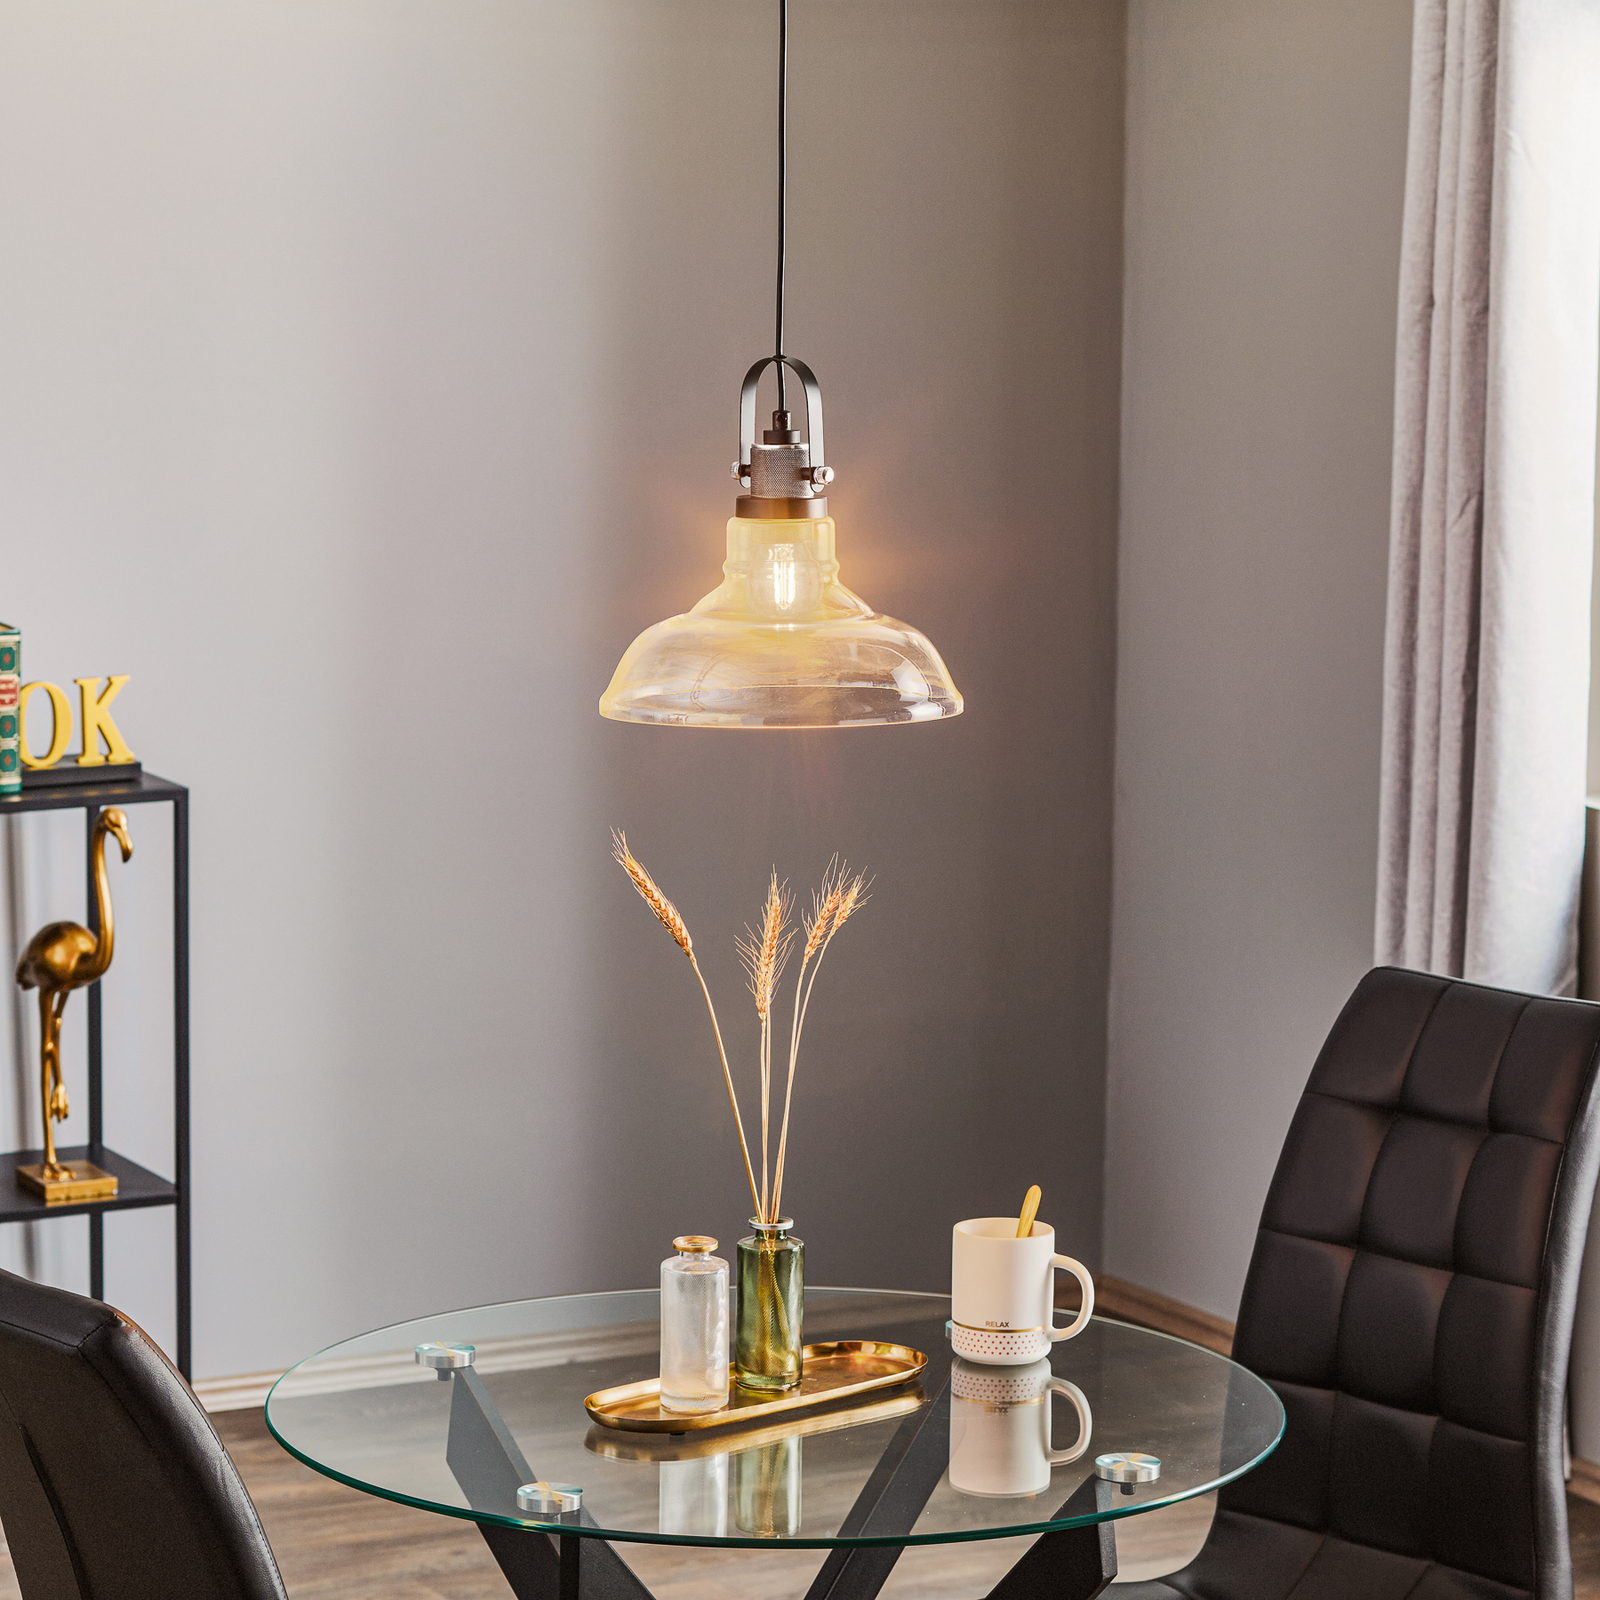 Teo pendant lamp with a glass lampshade, chrome